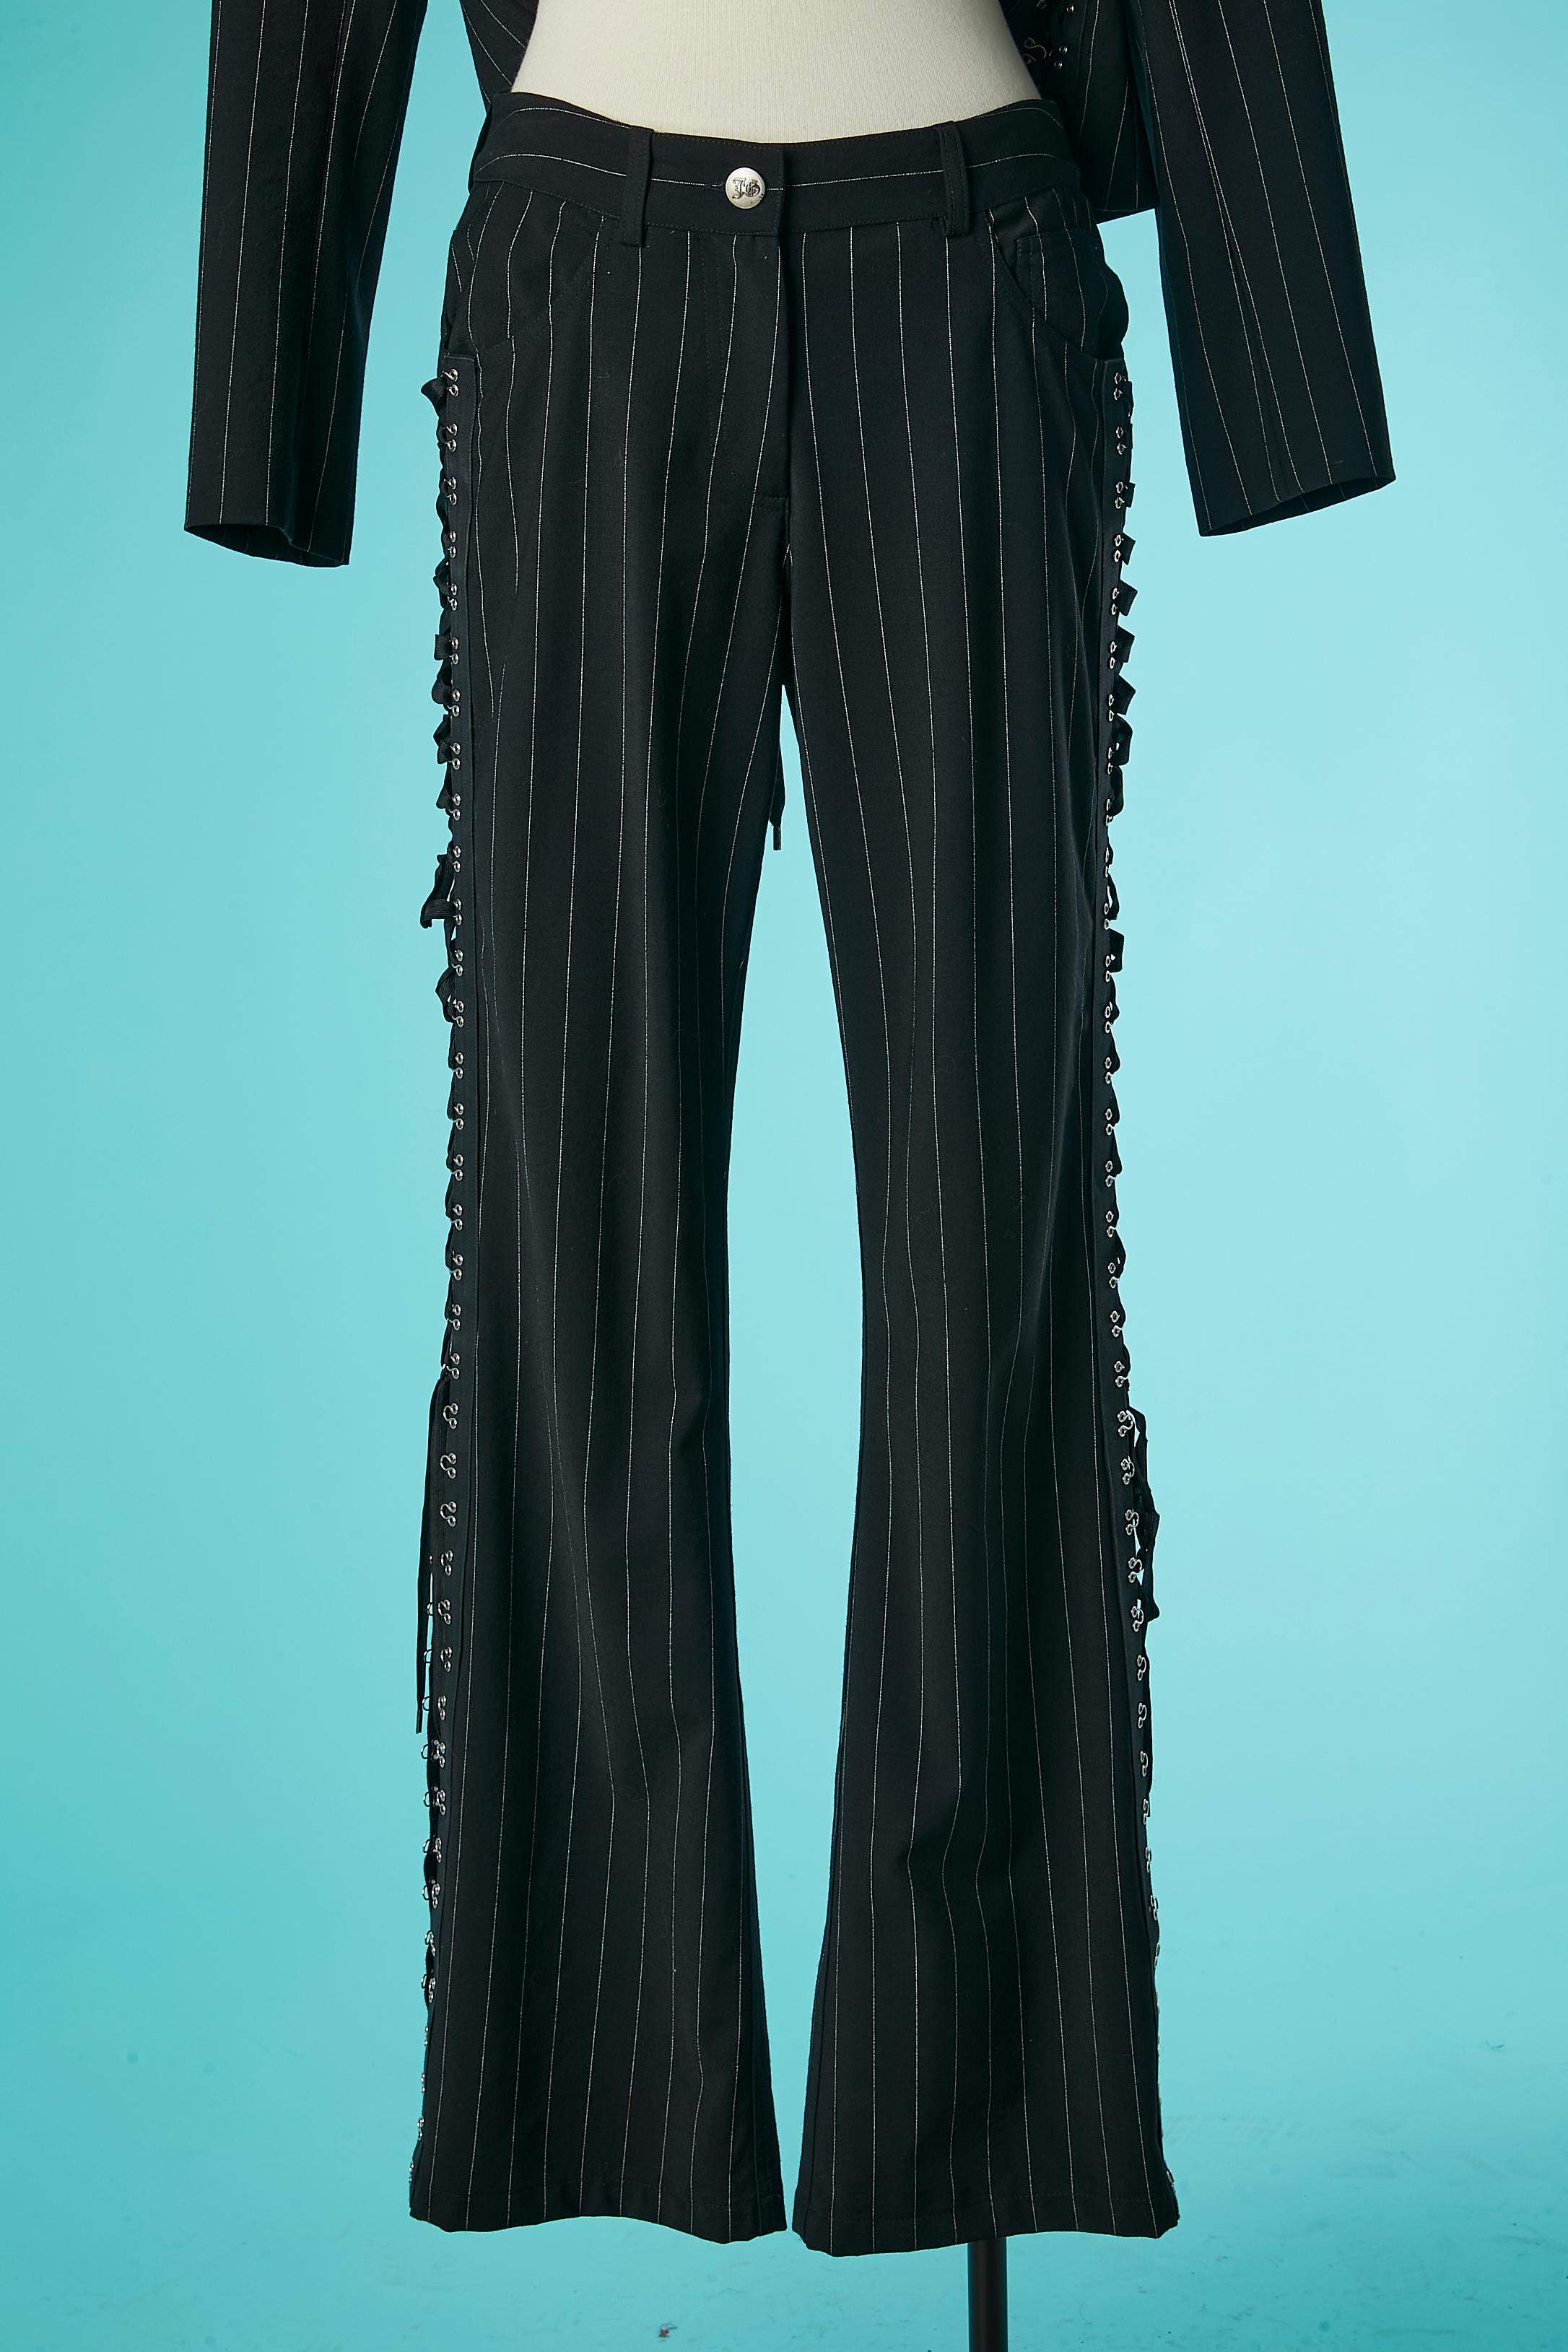 Striped and laced trouser pant suit ensemble John Galliano Circa 2000 4